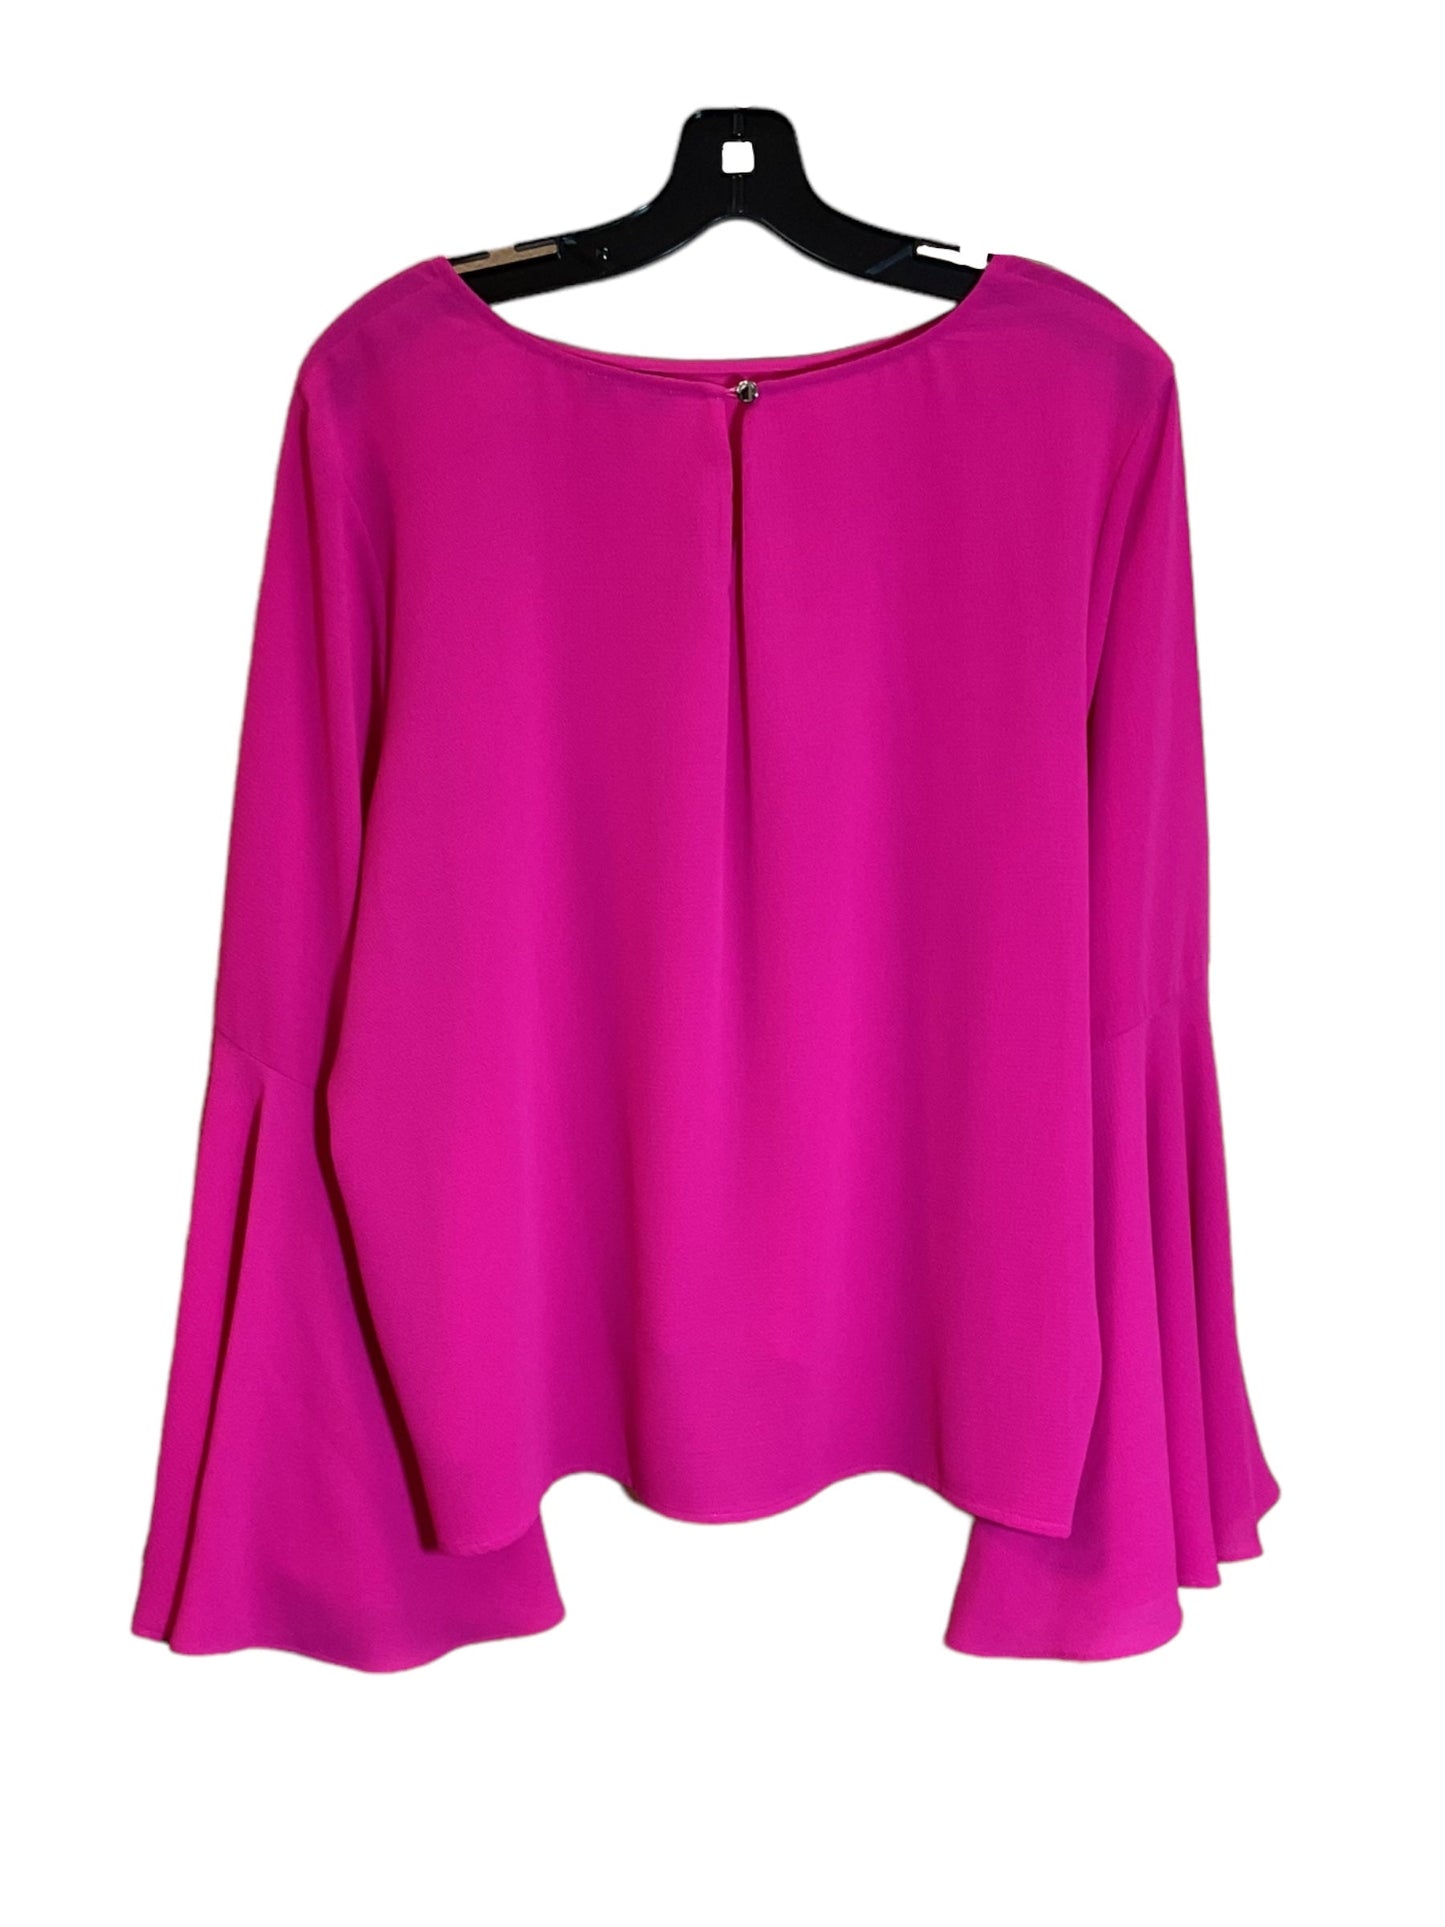 Top Long Sleeve By Vince Camuto  Size: L